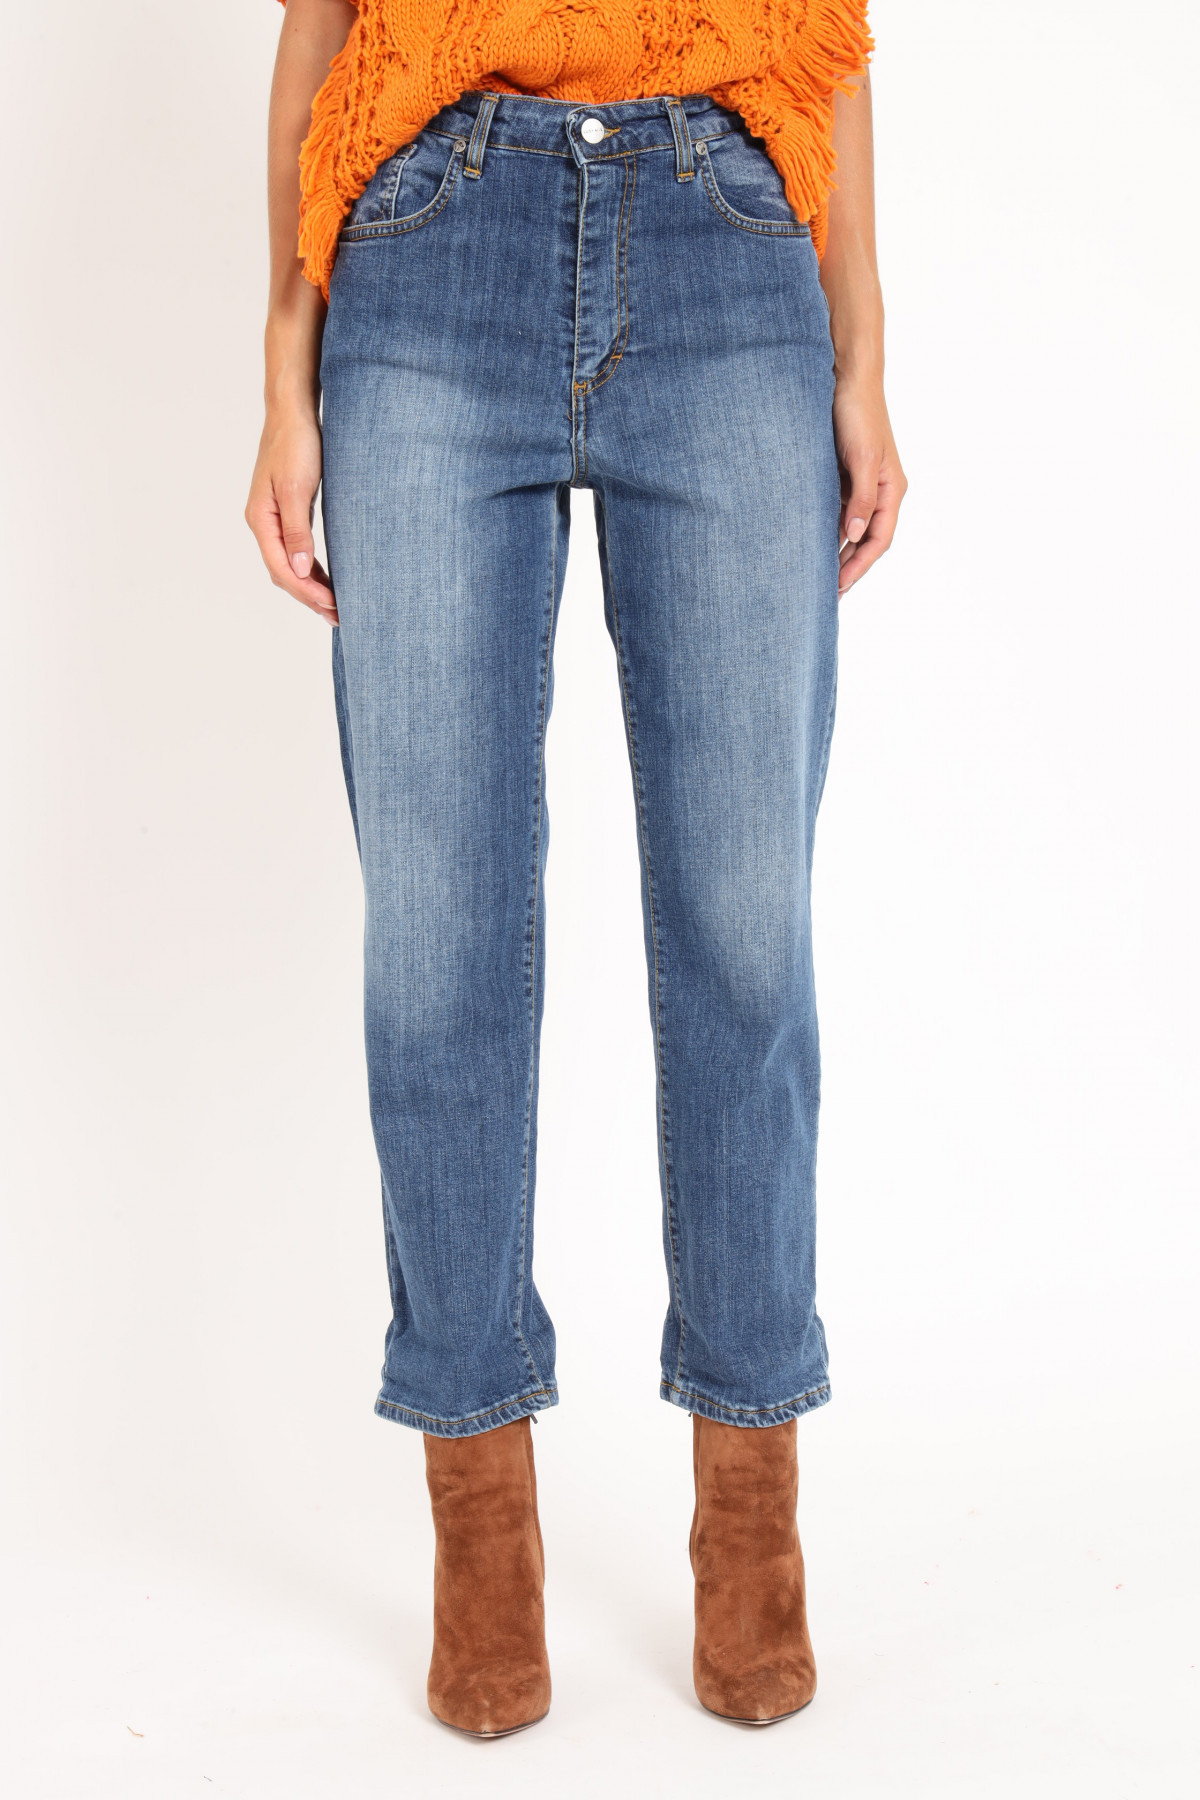 5 Pockets High Waist Relaxed Fit Jeans